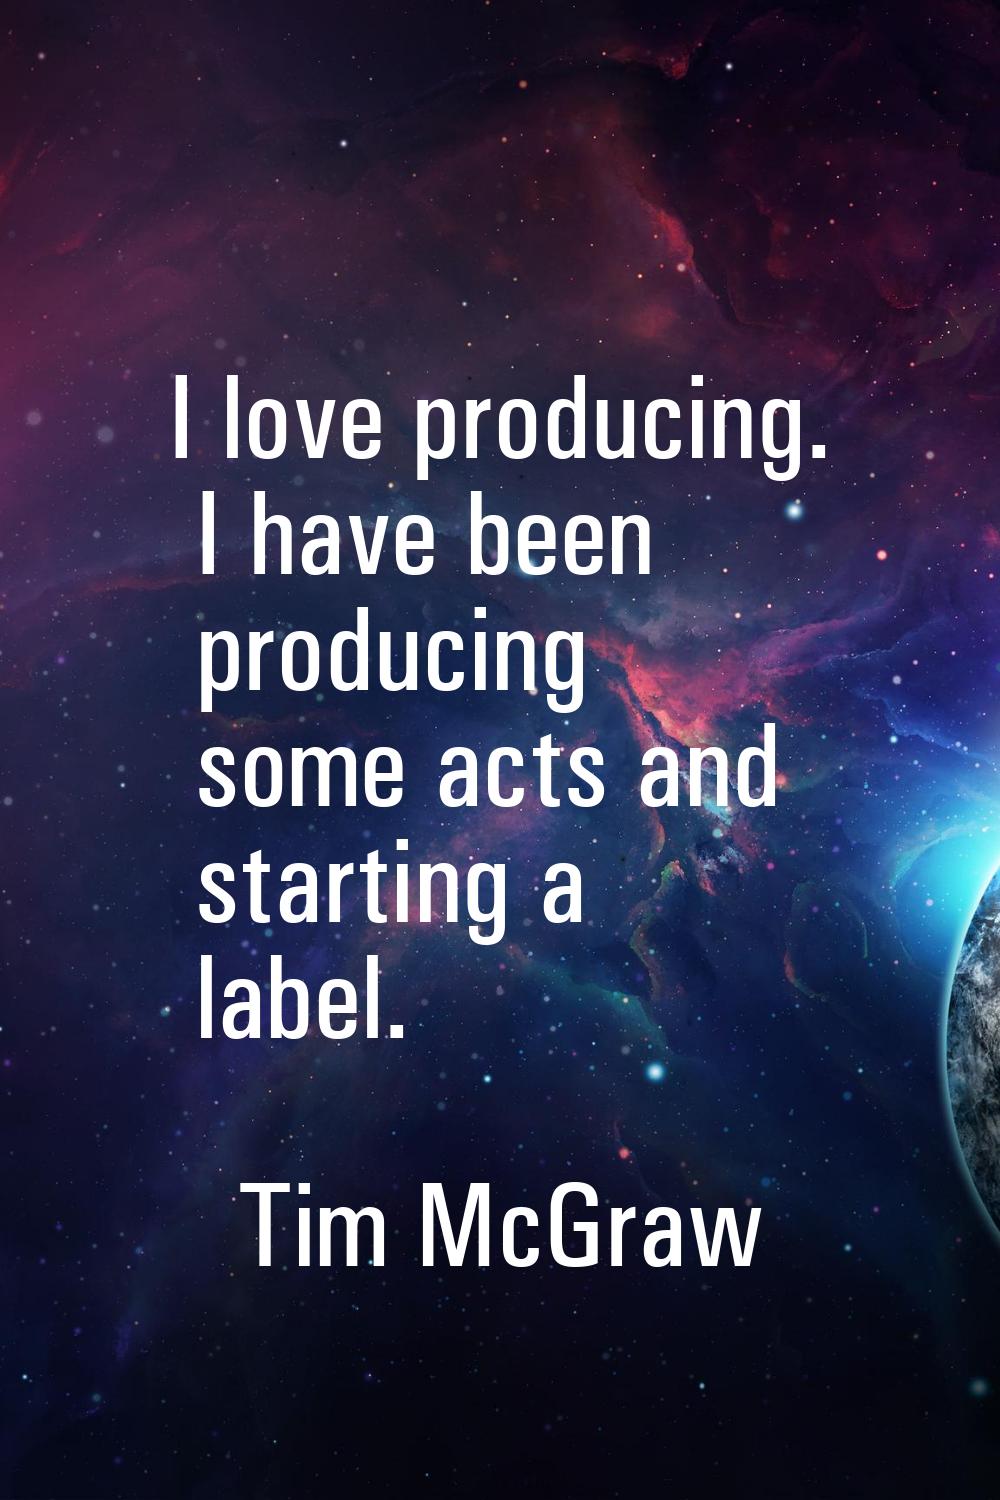 I love producing. I have been producing some acts and starting a label.